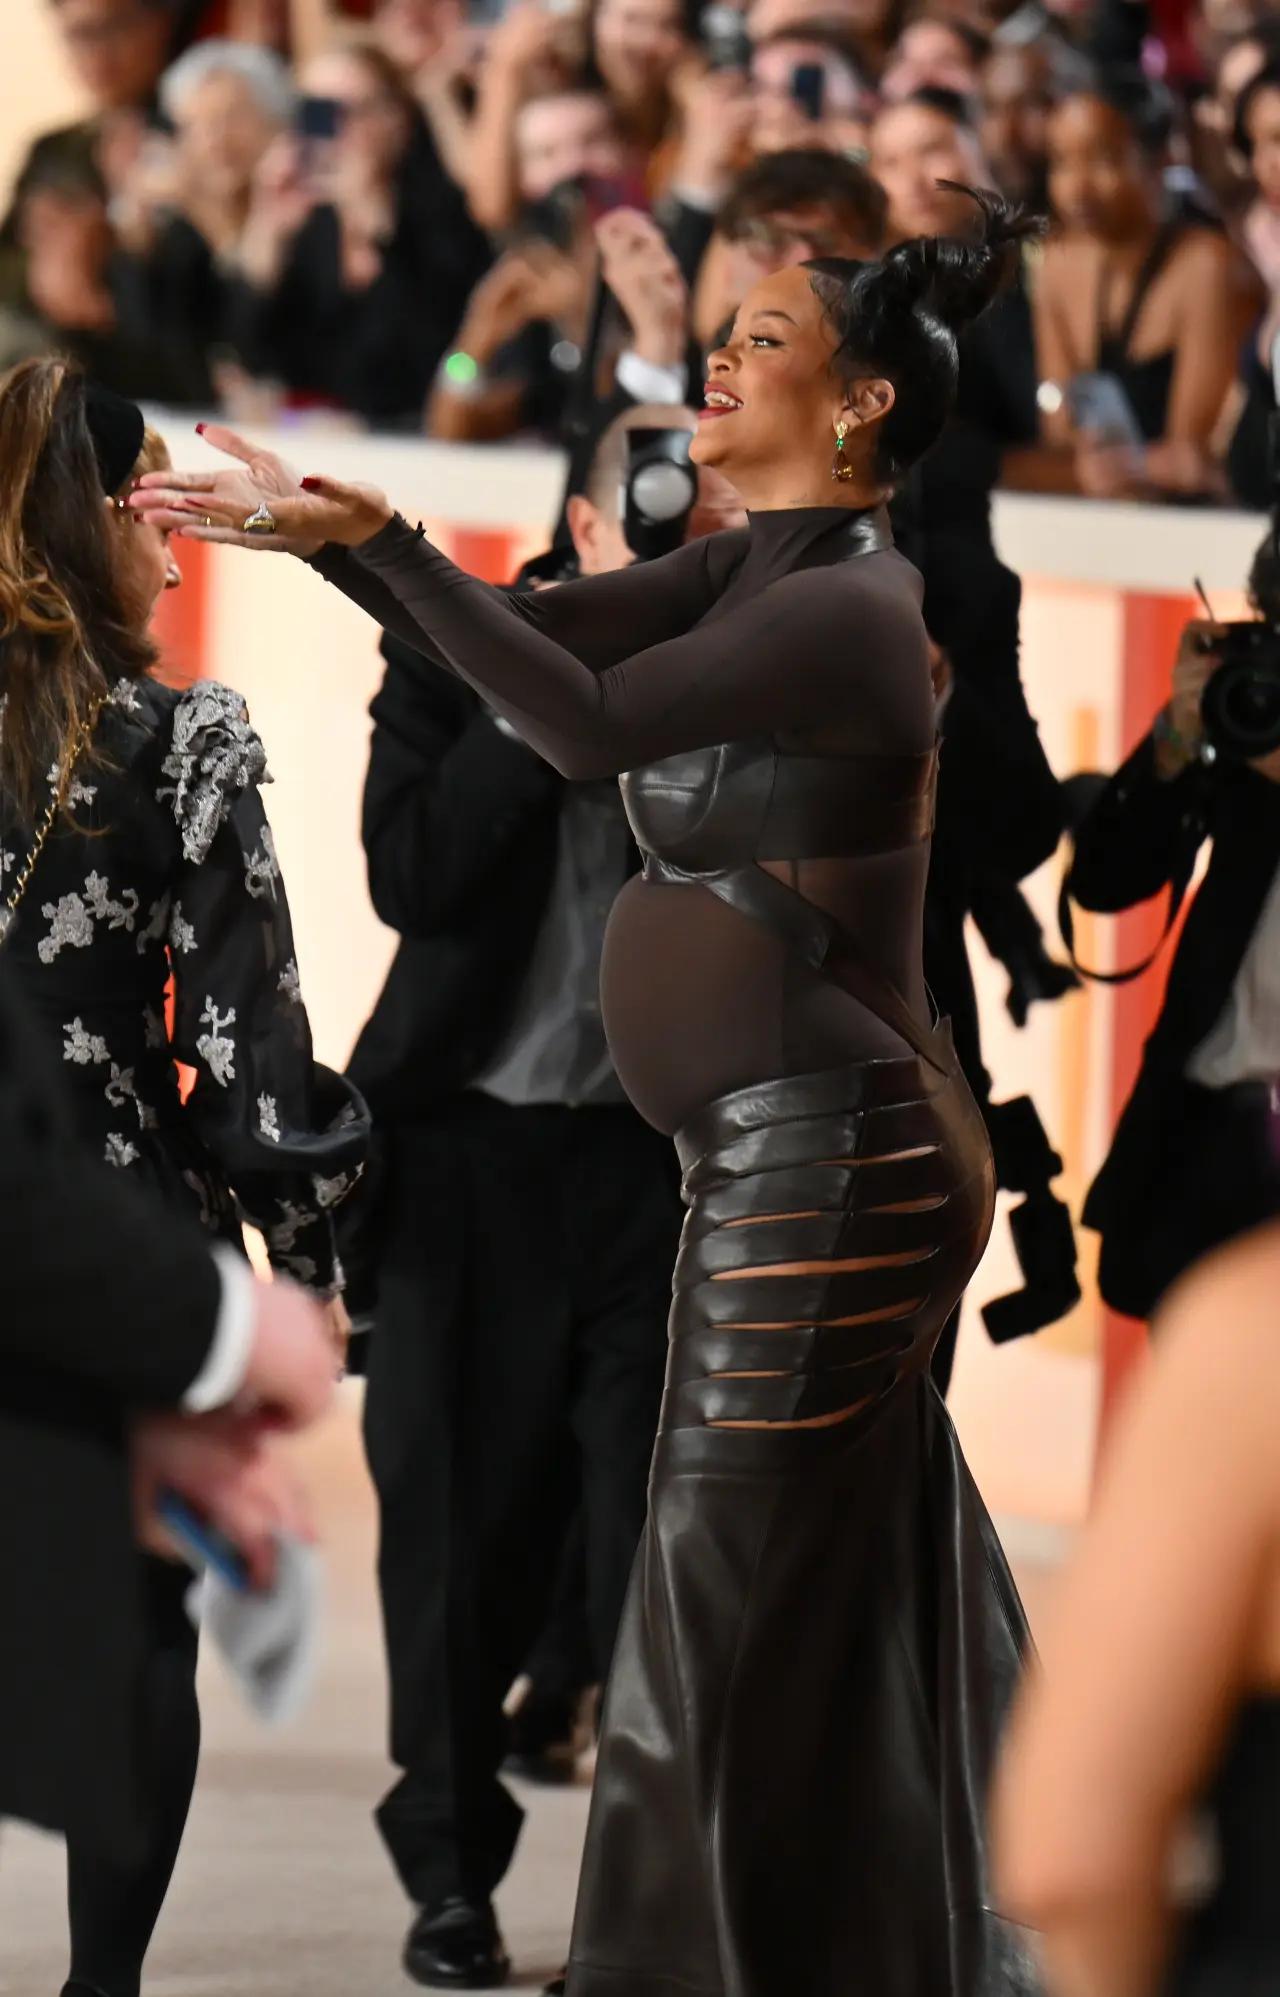 A moment that took the internet by storm: Rihanna flaunted her baby bump in a striking black gown at Oscars 2023